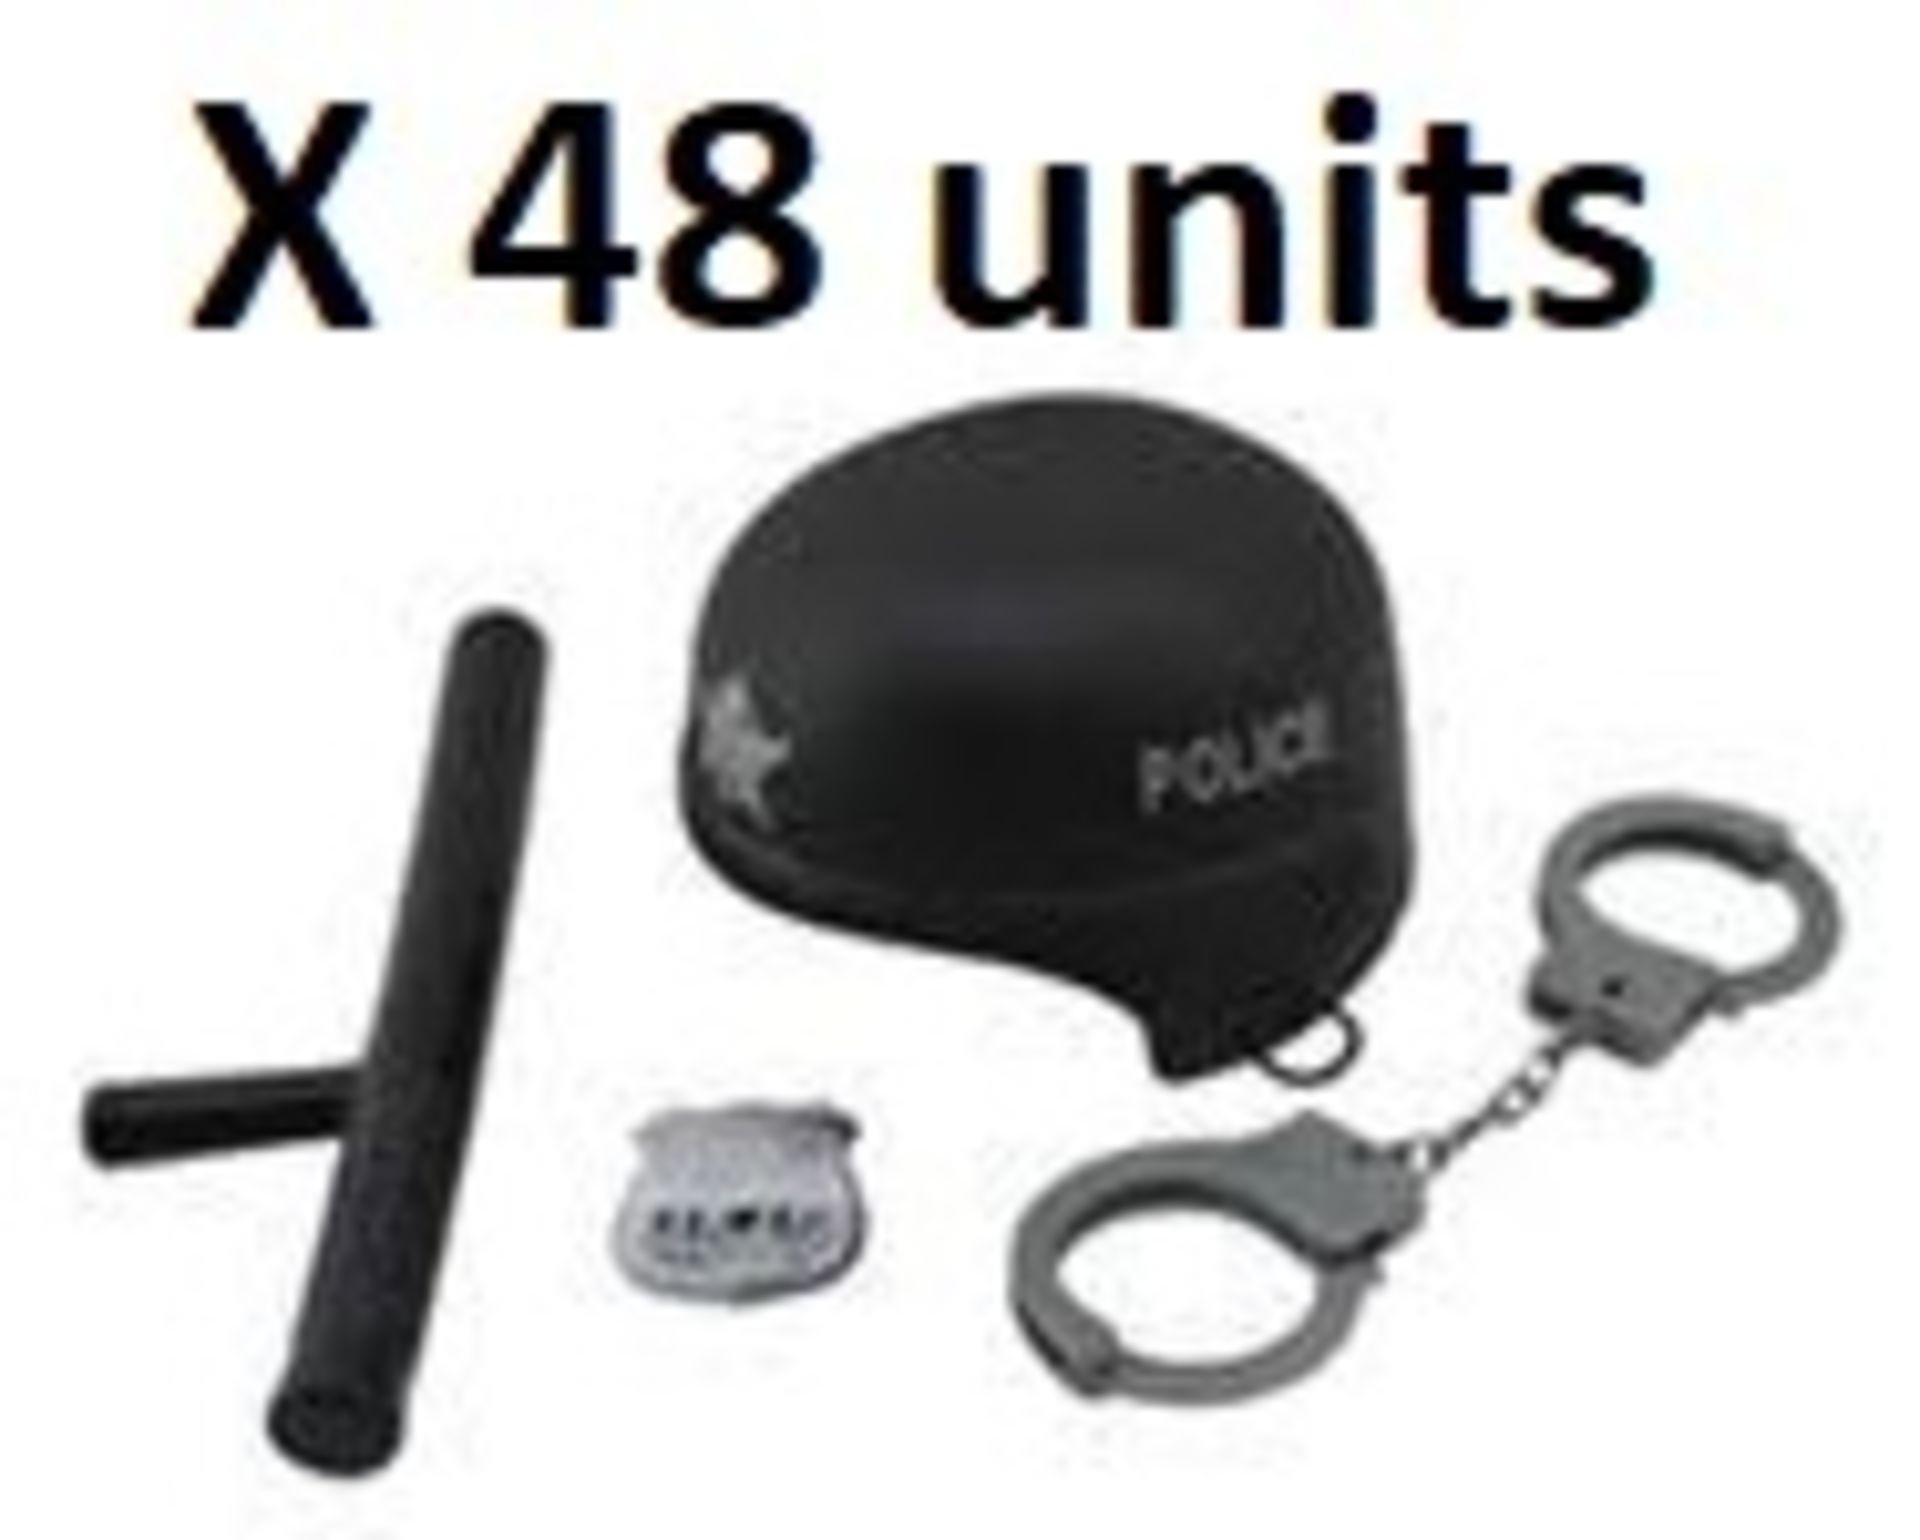 (14F) Approx. 48 New Children's Police Sets To Include Hat, badge And Handcuffs